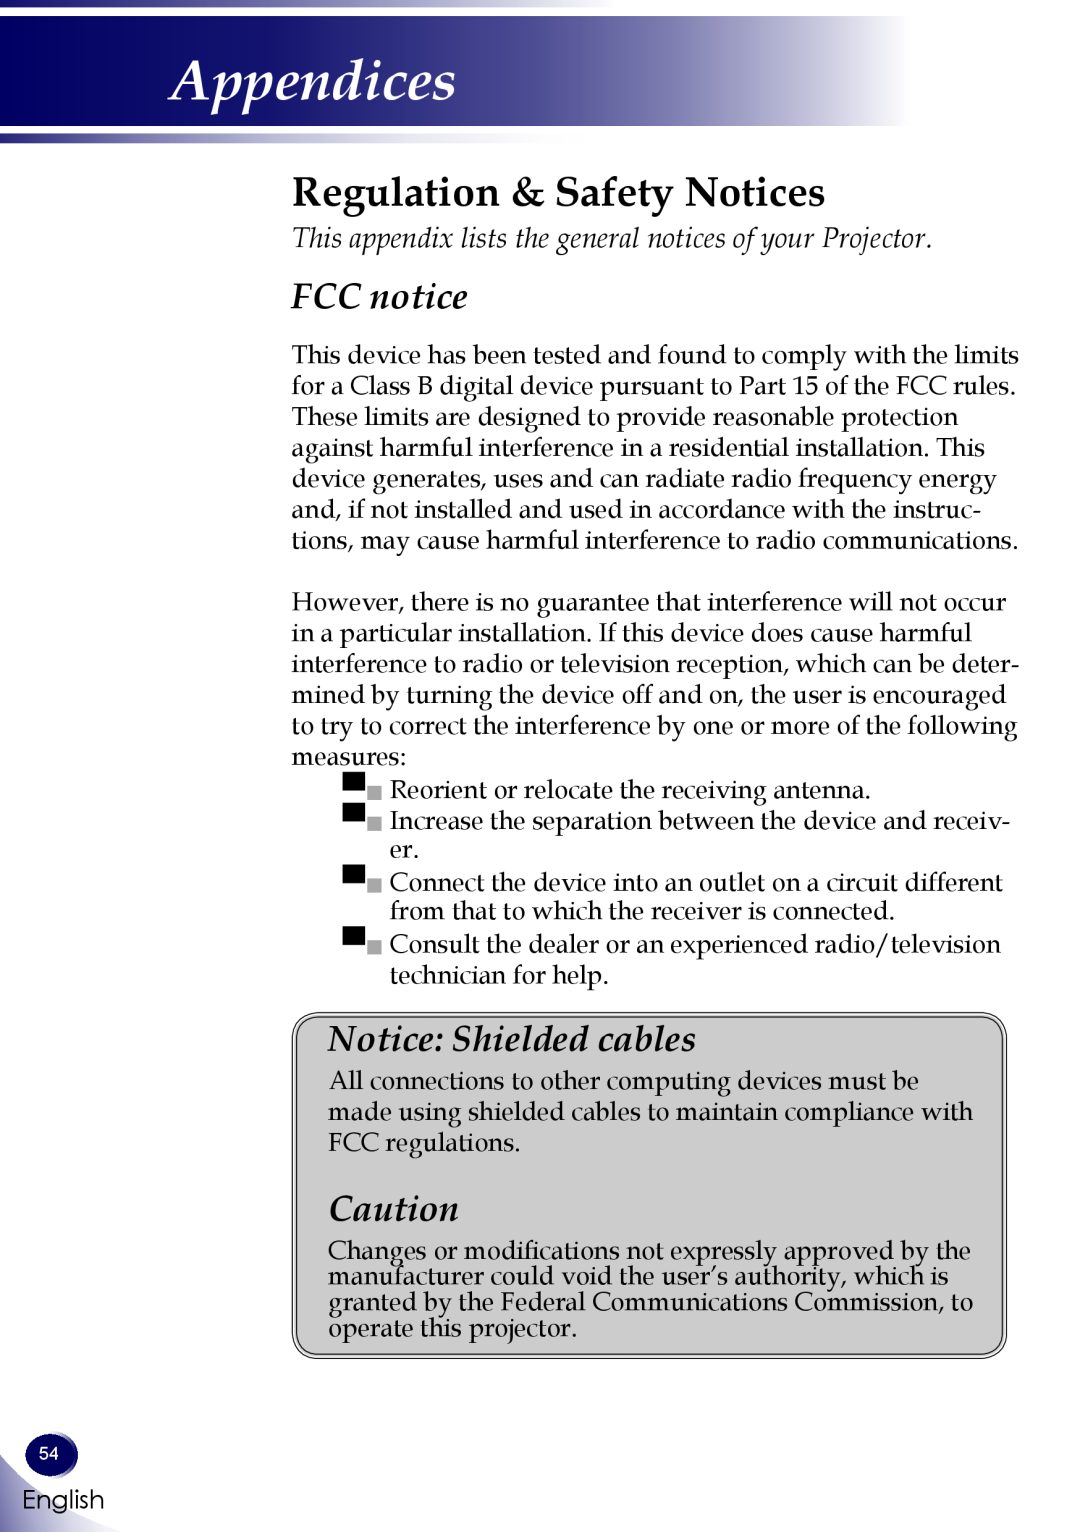 Sanyo PDG-DXL100 owner manual Regulation & Safety Notices, FCC notice, Notice Shielded cables, Appendices 